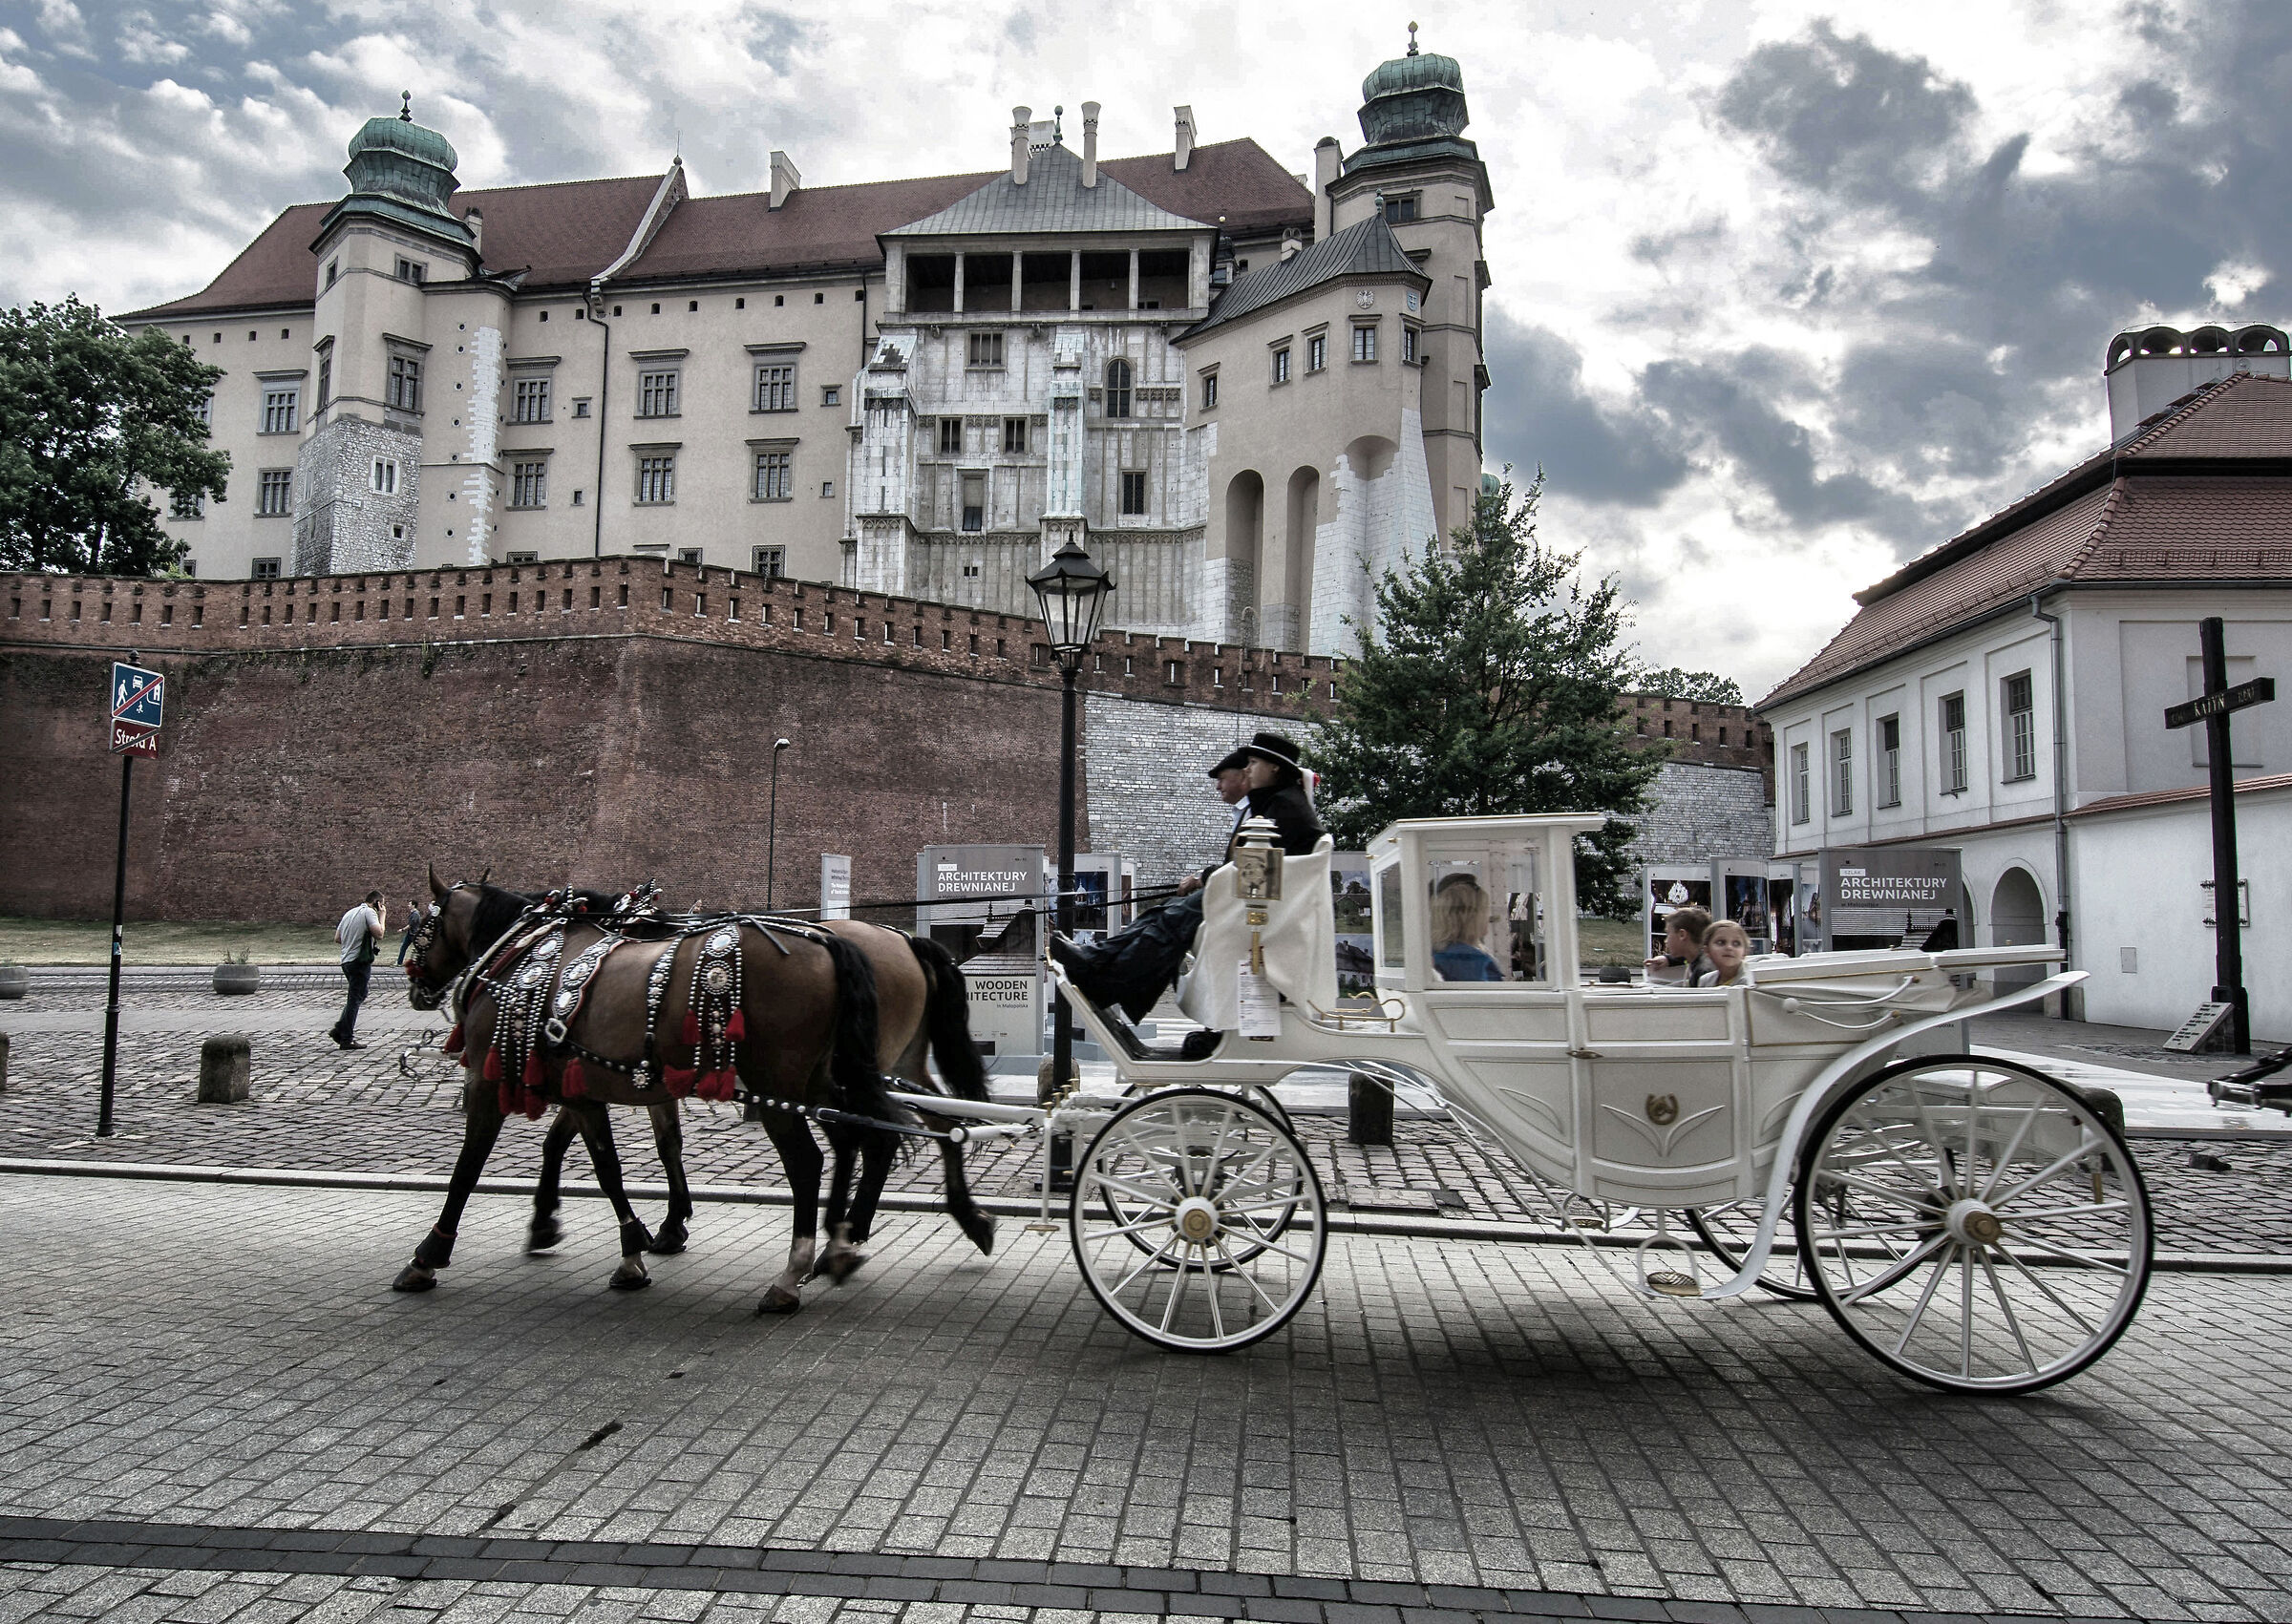 A carriage ride...